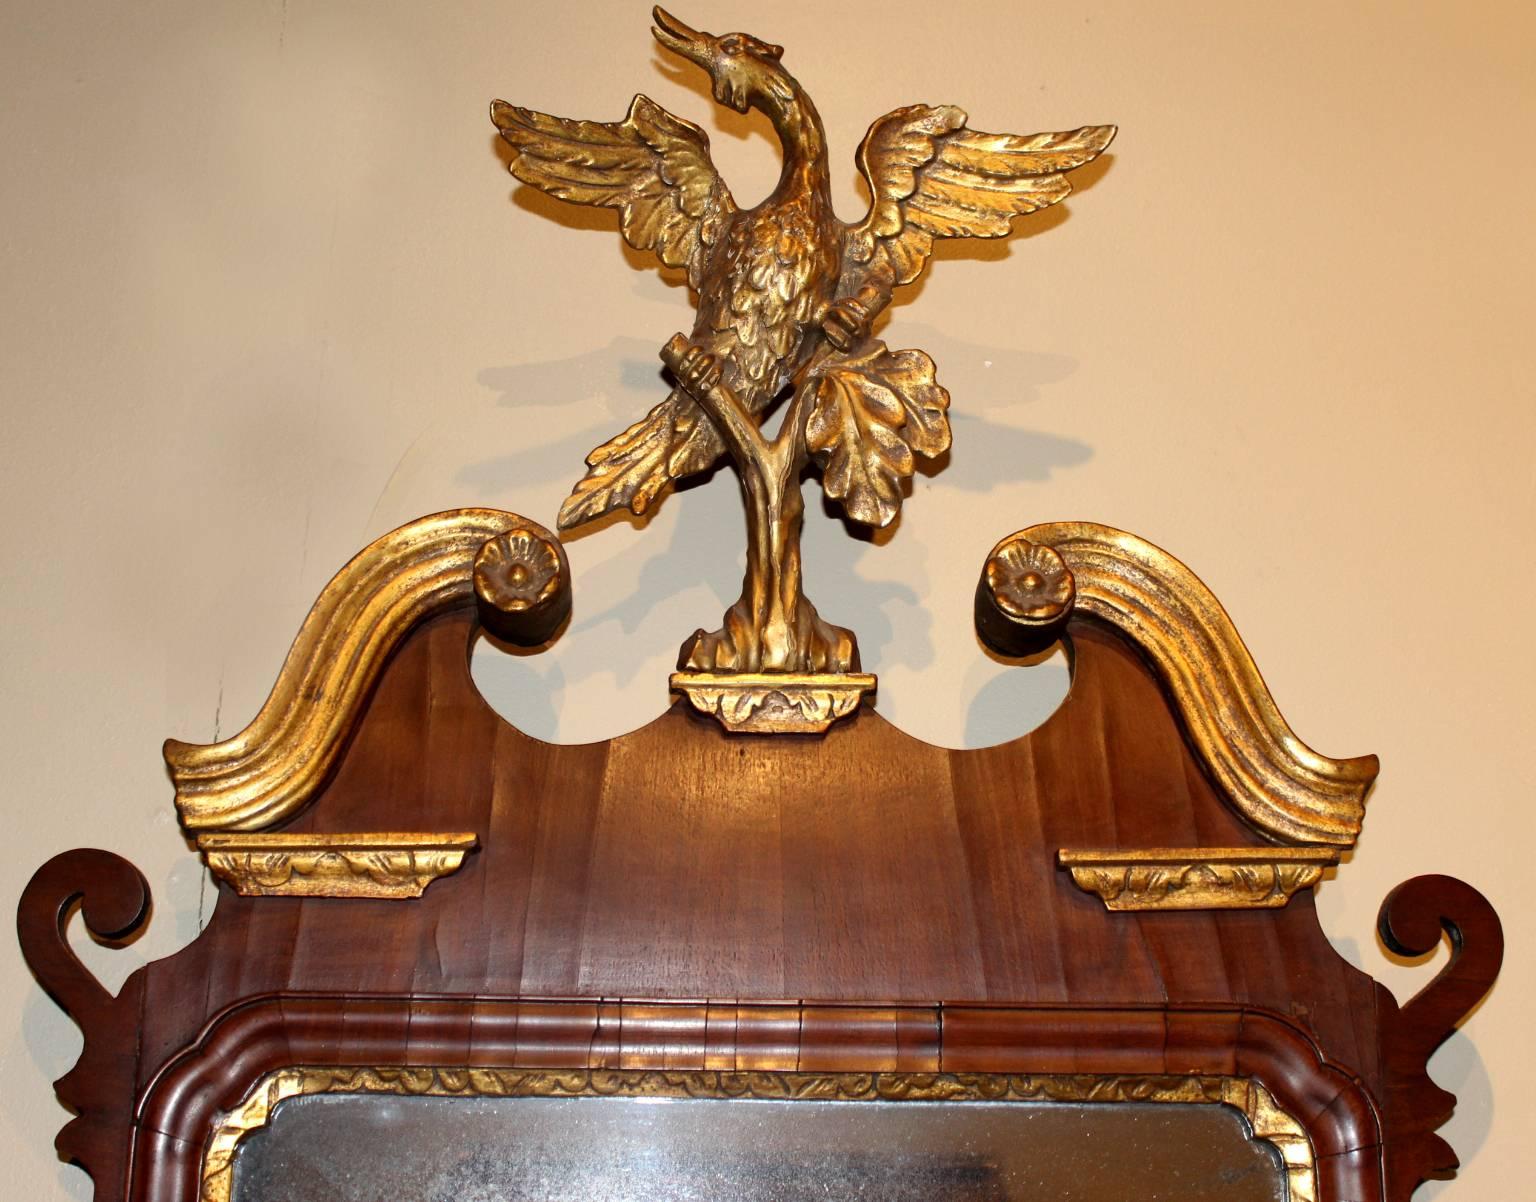 This Chippendale mahogany and gilt Constitution mirror features gilded side leaves and a carved and gilded arched crest with floral rosettes and a beautifully carved phoenix bird. Fine condition and original gilt, American or English, circa 1770.